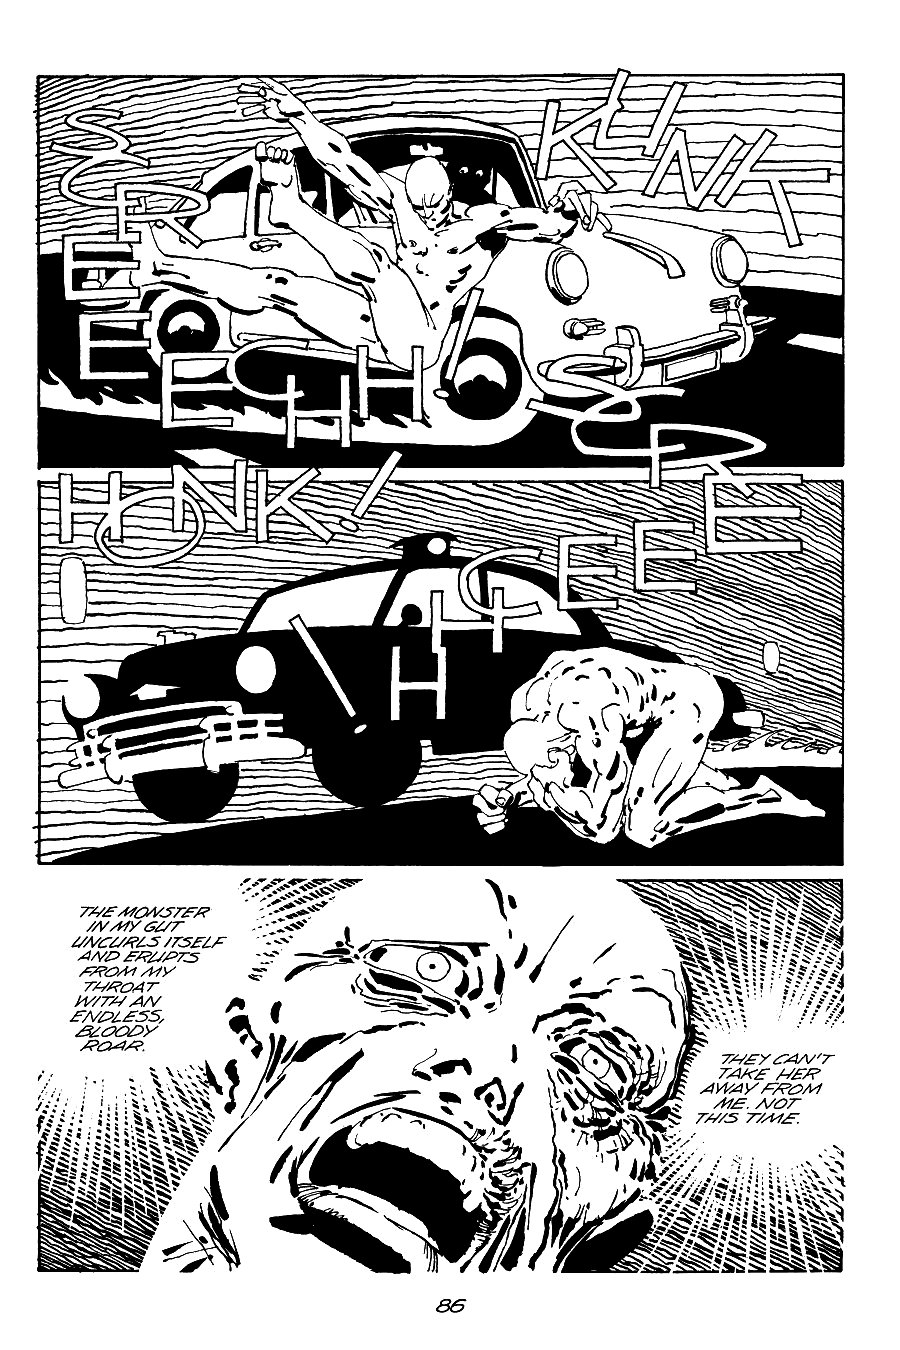 page 86 of sin city 2 the hard goodbye